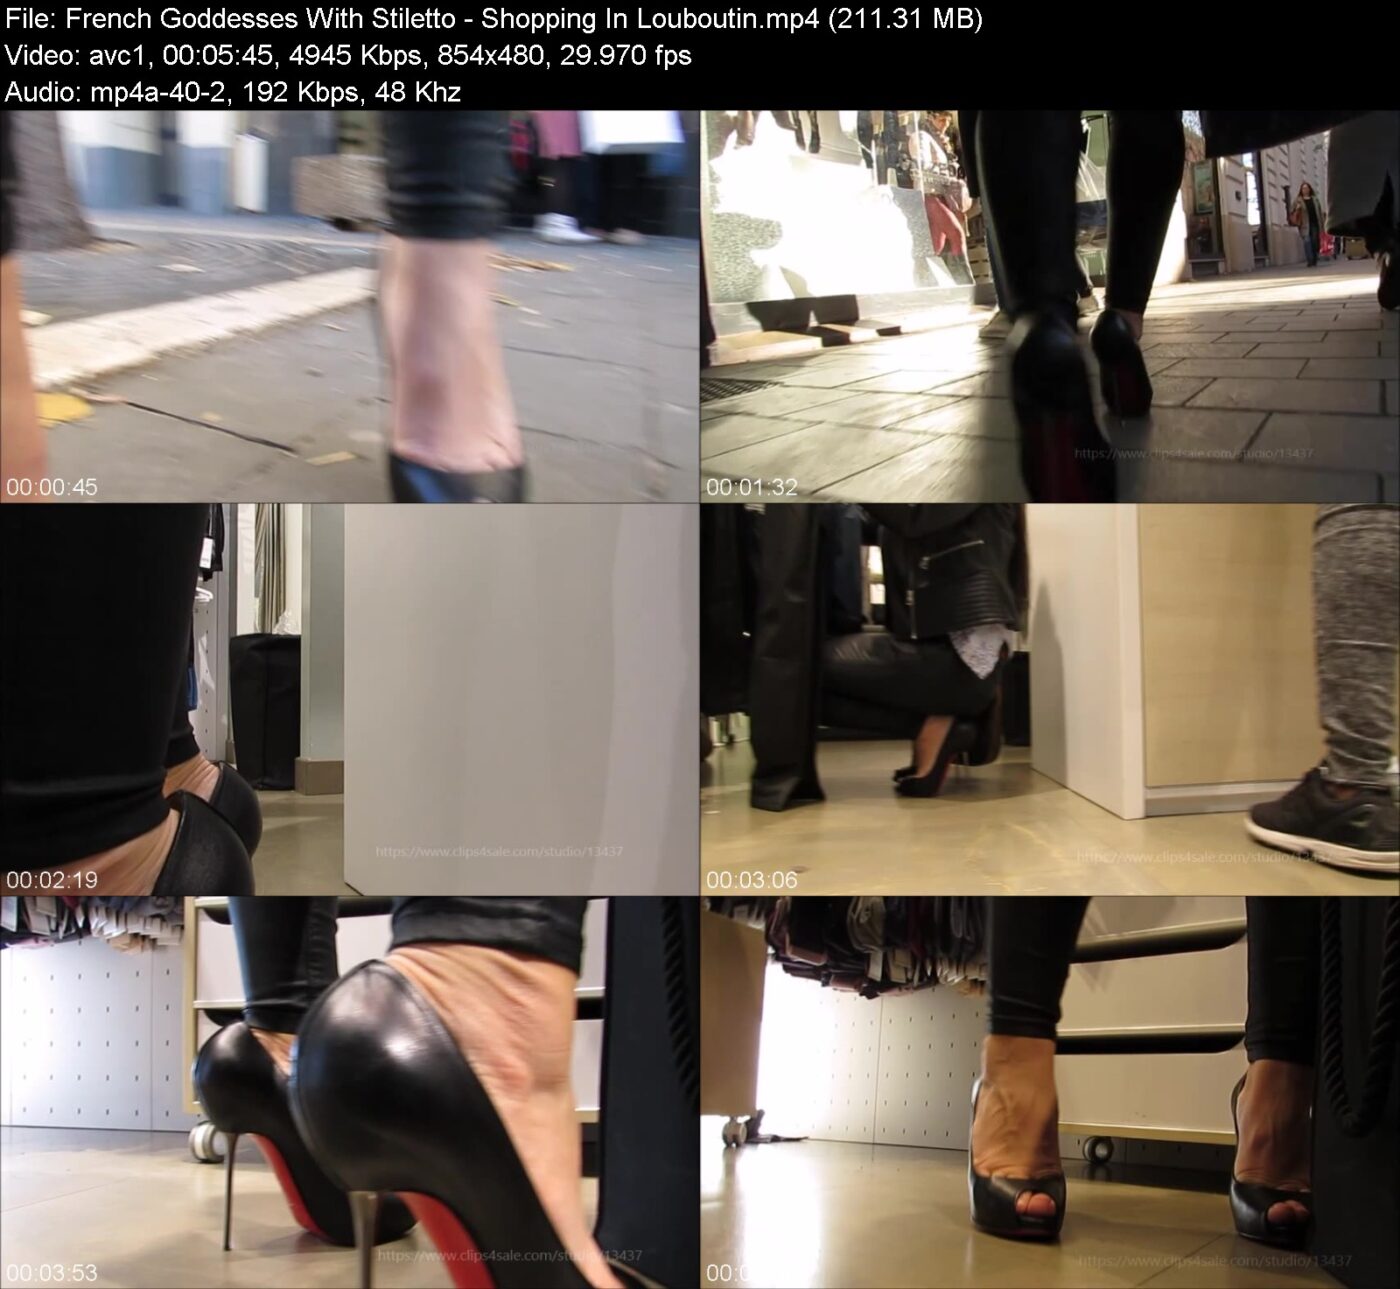 French Goddesses With Stiletto - Shopping In Louboutin